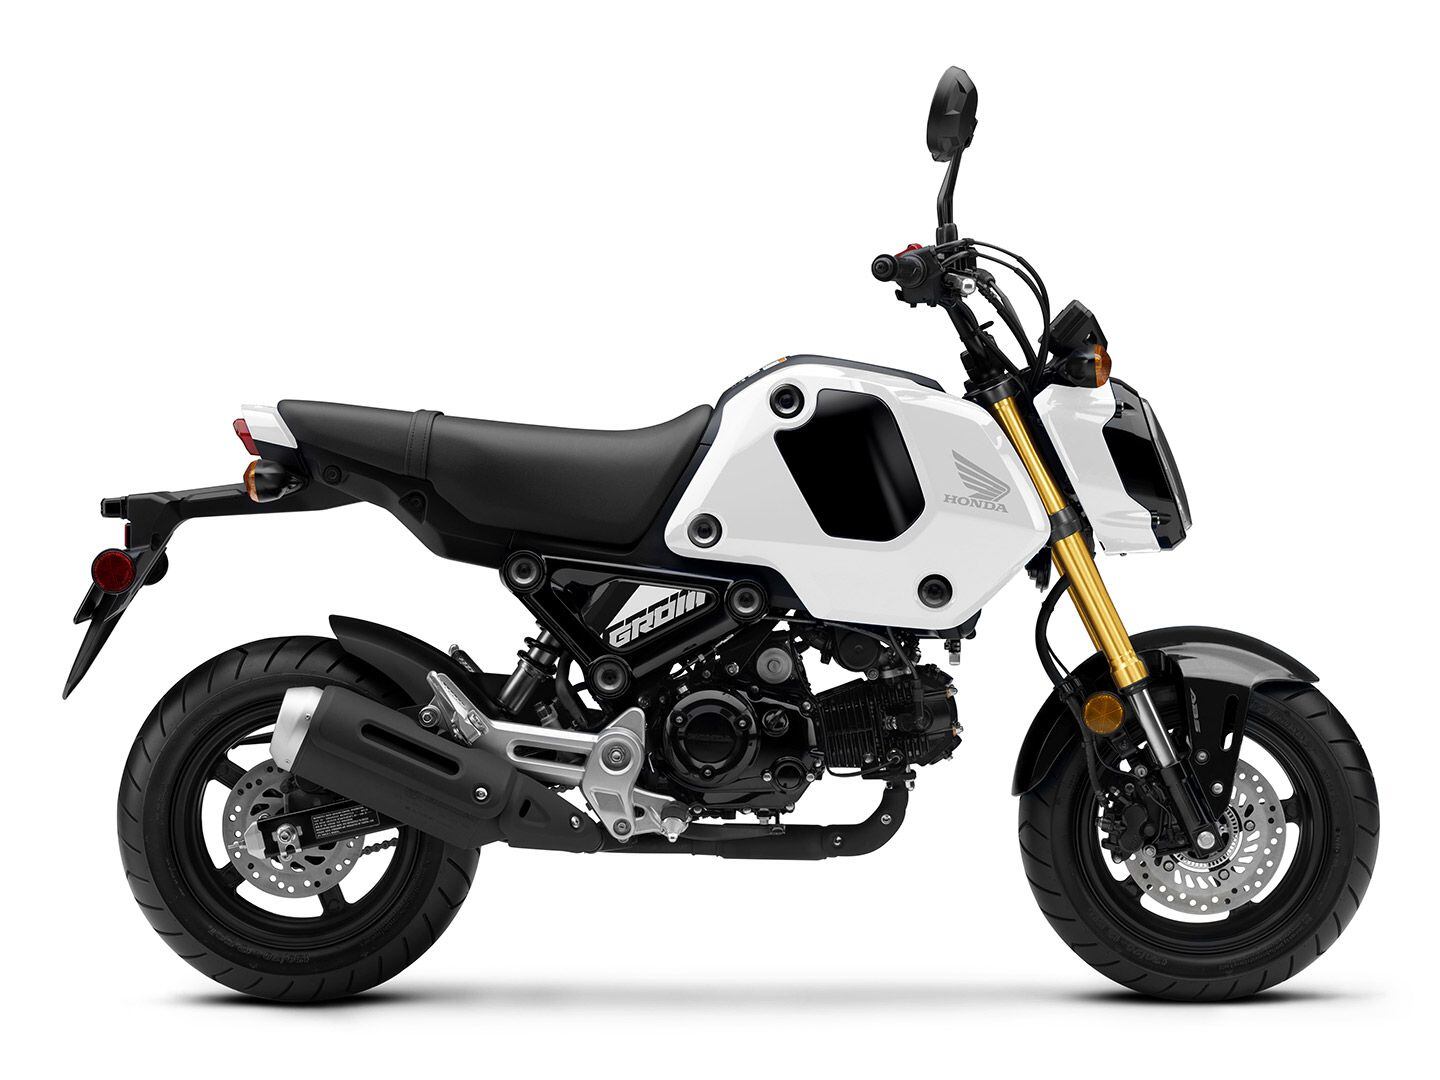 This miniMOTO was introduced in 2014 to get timid new riders on two wheels, but it also created its very own subculture craze as a customizable machine for the masses, and the same holds true a decade later. The 2024 Honda Grom has four body panels that attach and detach for easy customizing.